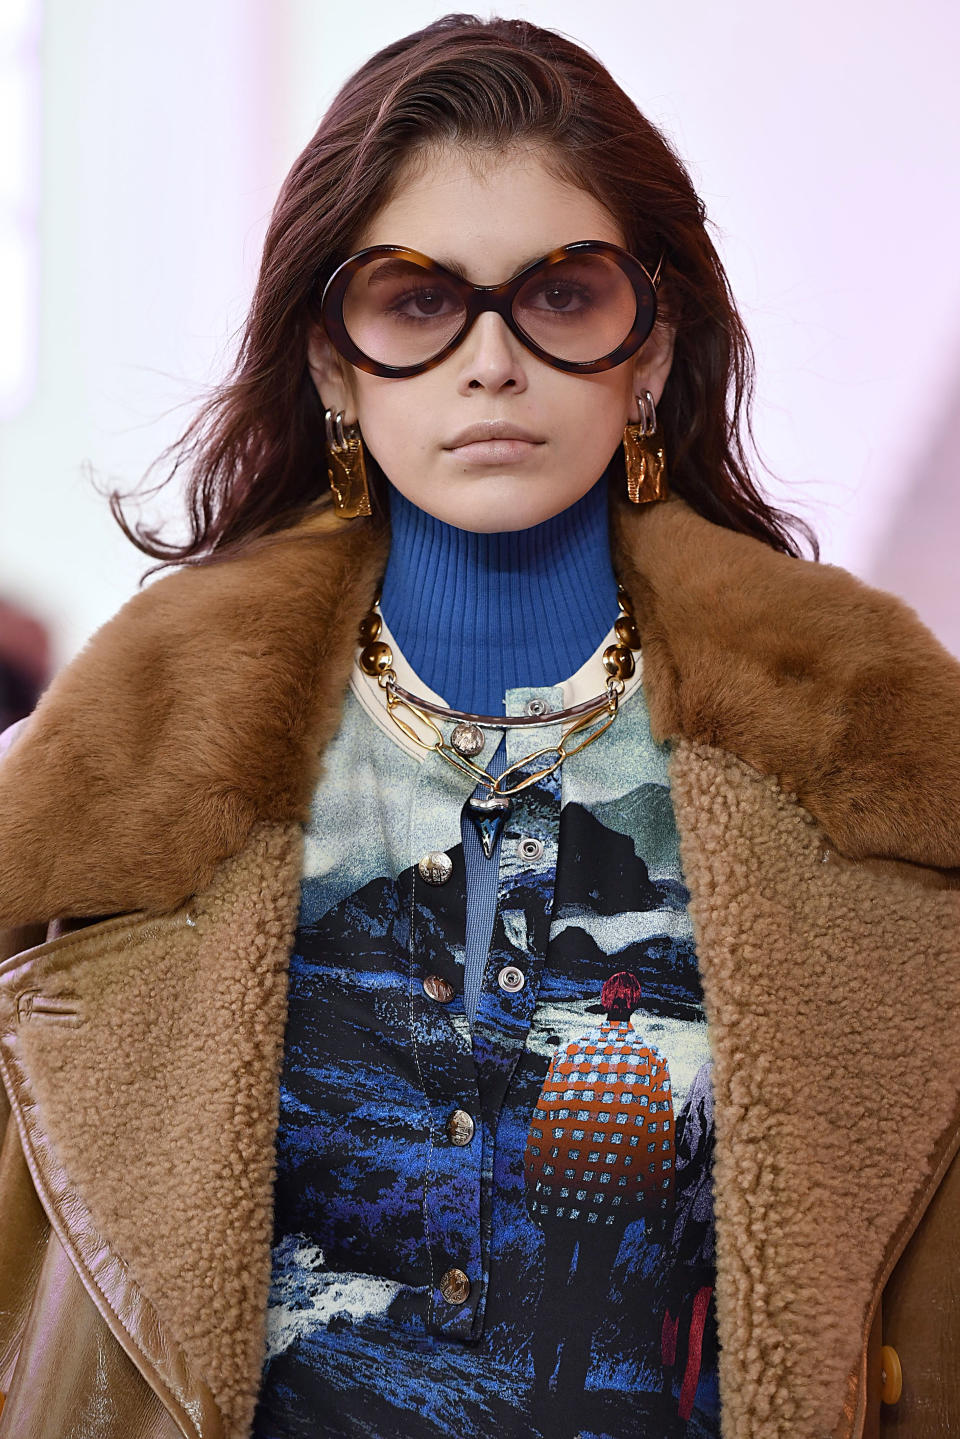 Kaia Gerber walks on the runway during the Chloe Ready To Wear Fashion Show during Paris Fashion Week F/W 2019 held in Paris, France on February 28, 2019. (Photo by Jonas Gustavsson/Sipa USA)